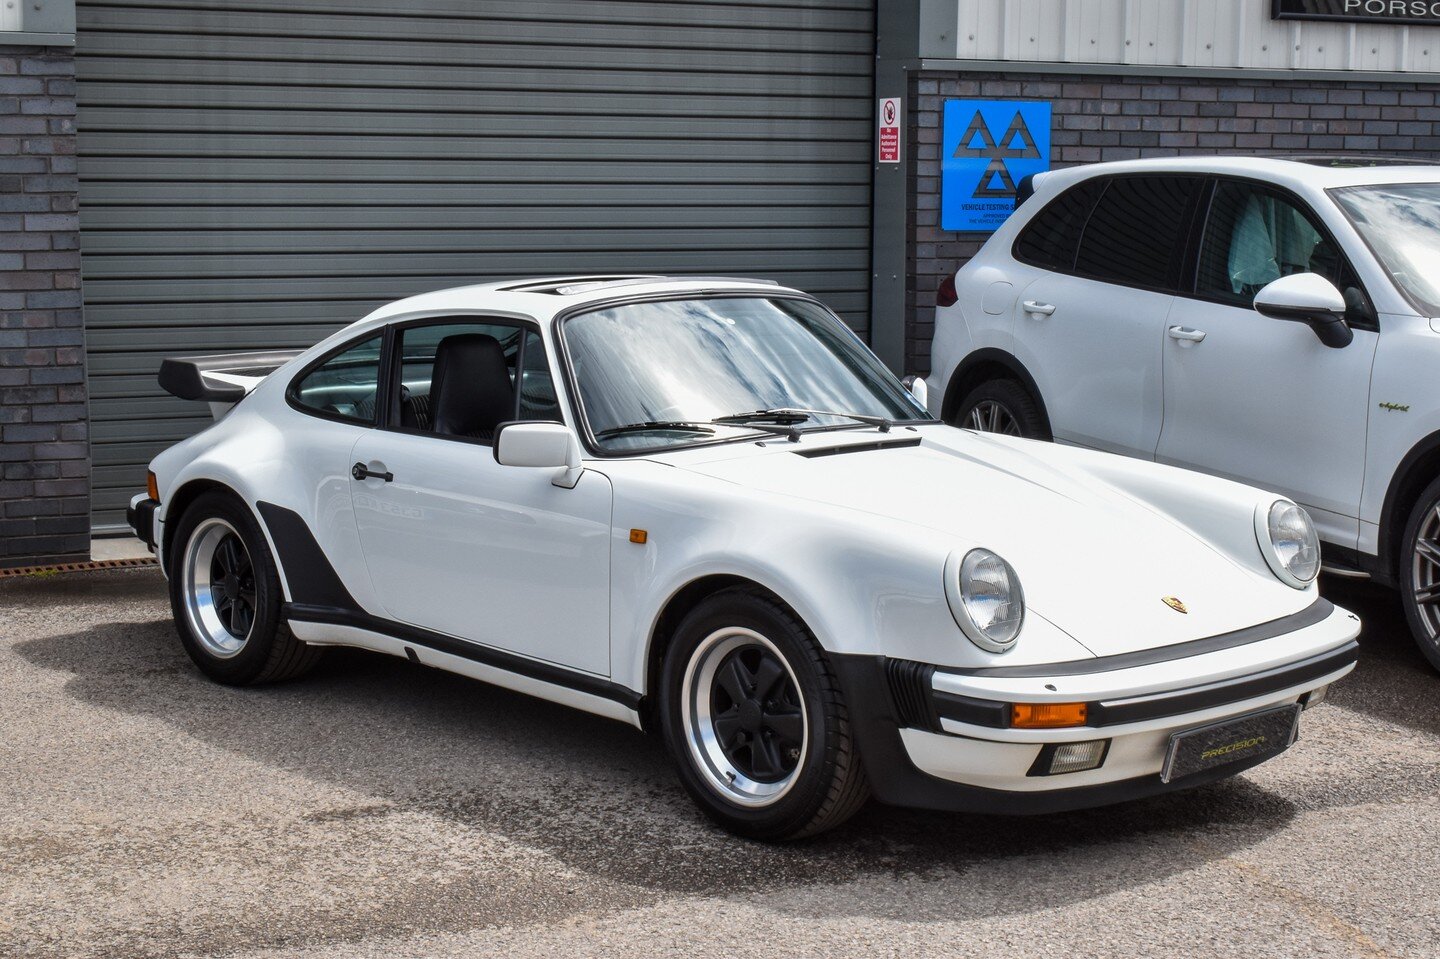 1986 Porsche 930 Turbo FOR SALE - &pound;129,995 

This Porsche 930 Turbo is a very well-preserved example of a now classic performance car from the late 80&rsquo;s. Presented in Grand Prix White with a 3.3 litre Turbo charged engine coupled to a 4-s